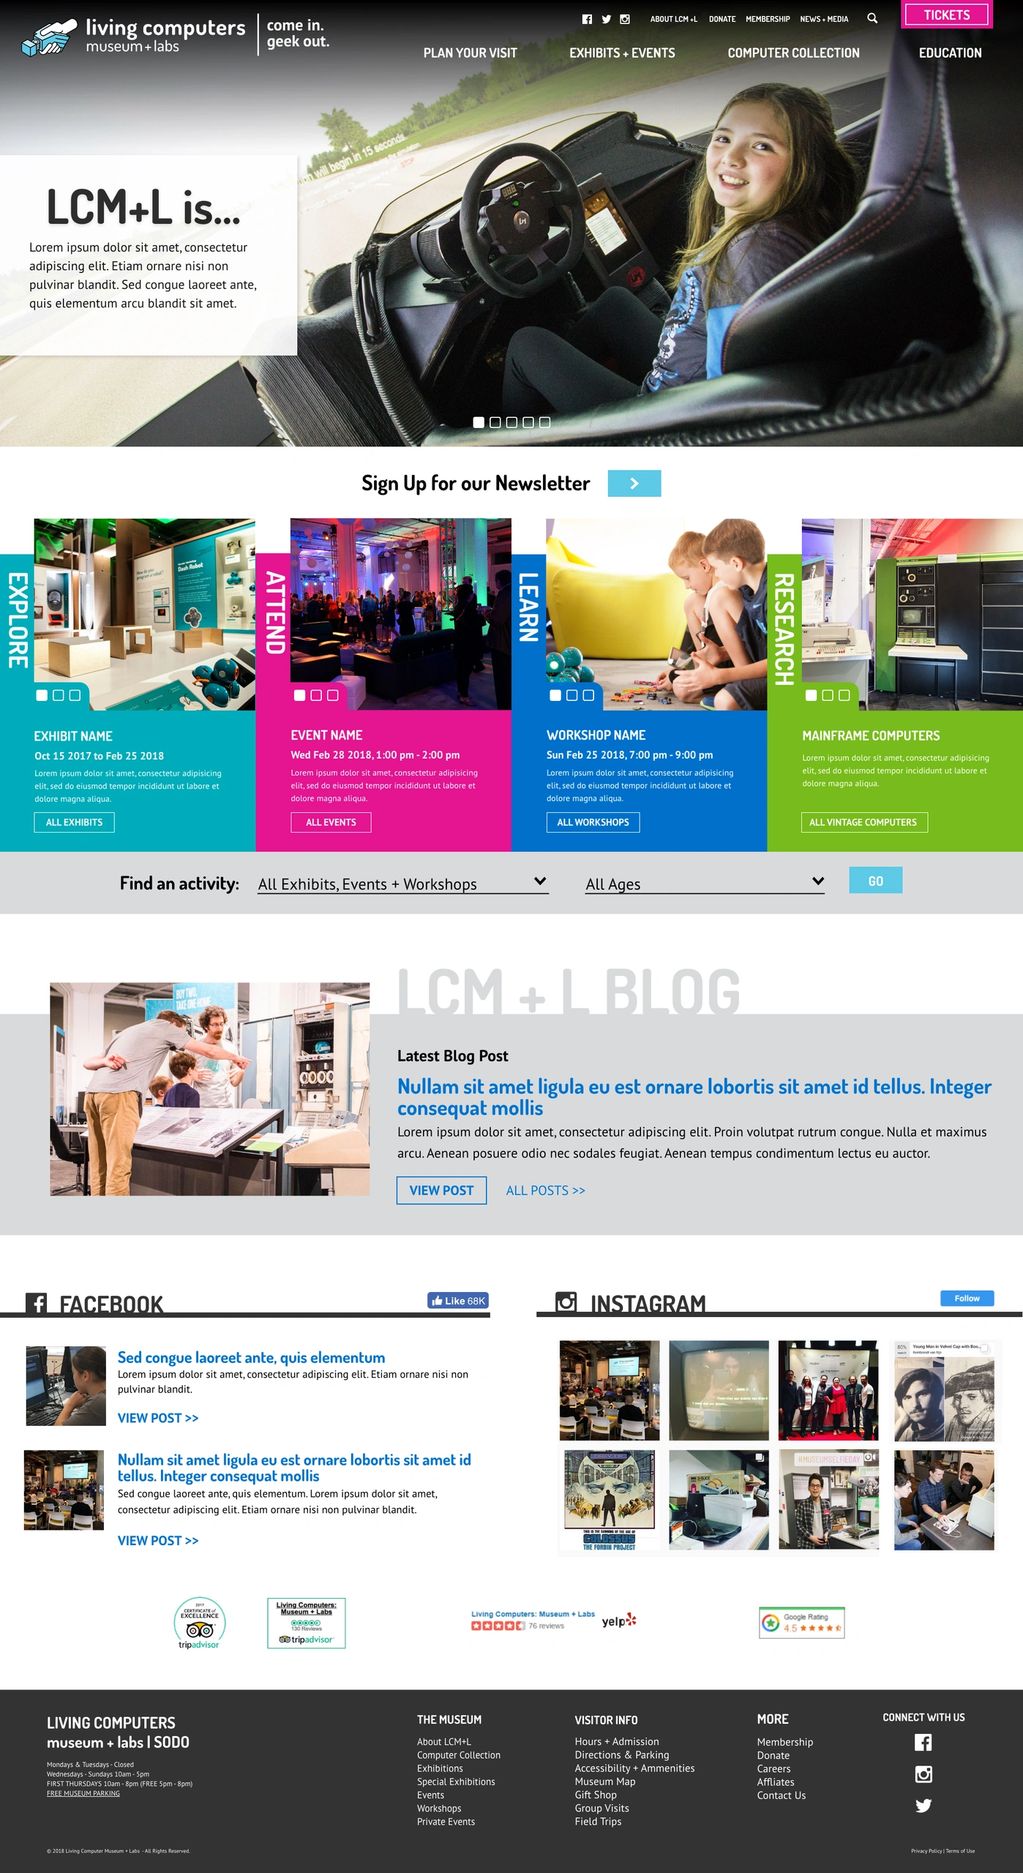 Photo of the home page of Living Computers Museum. There is a girl siting in a VR simulator.